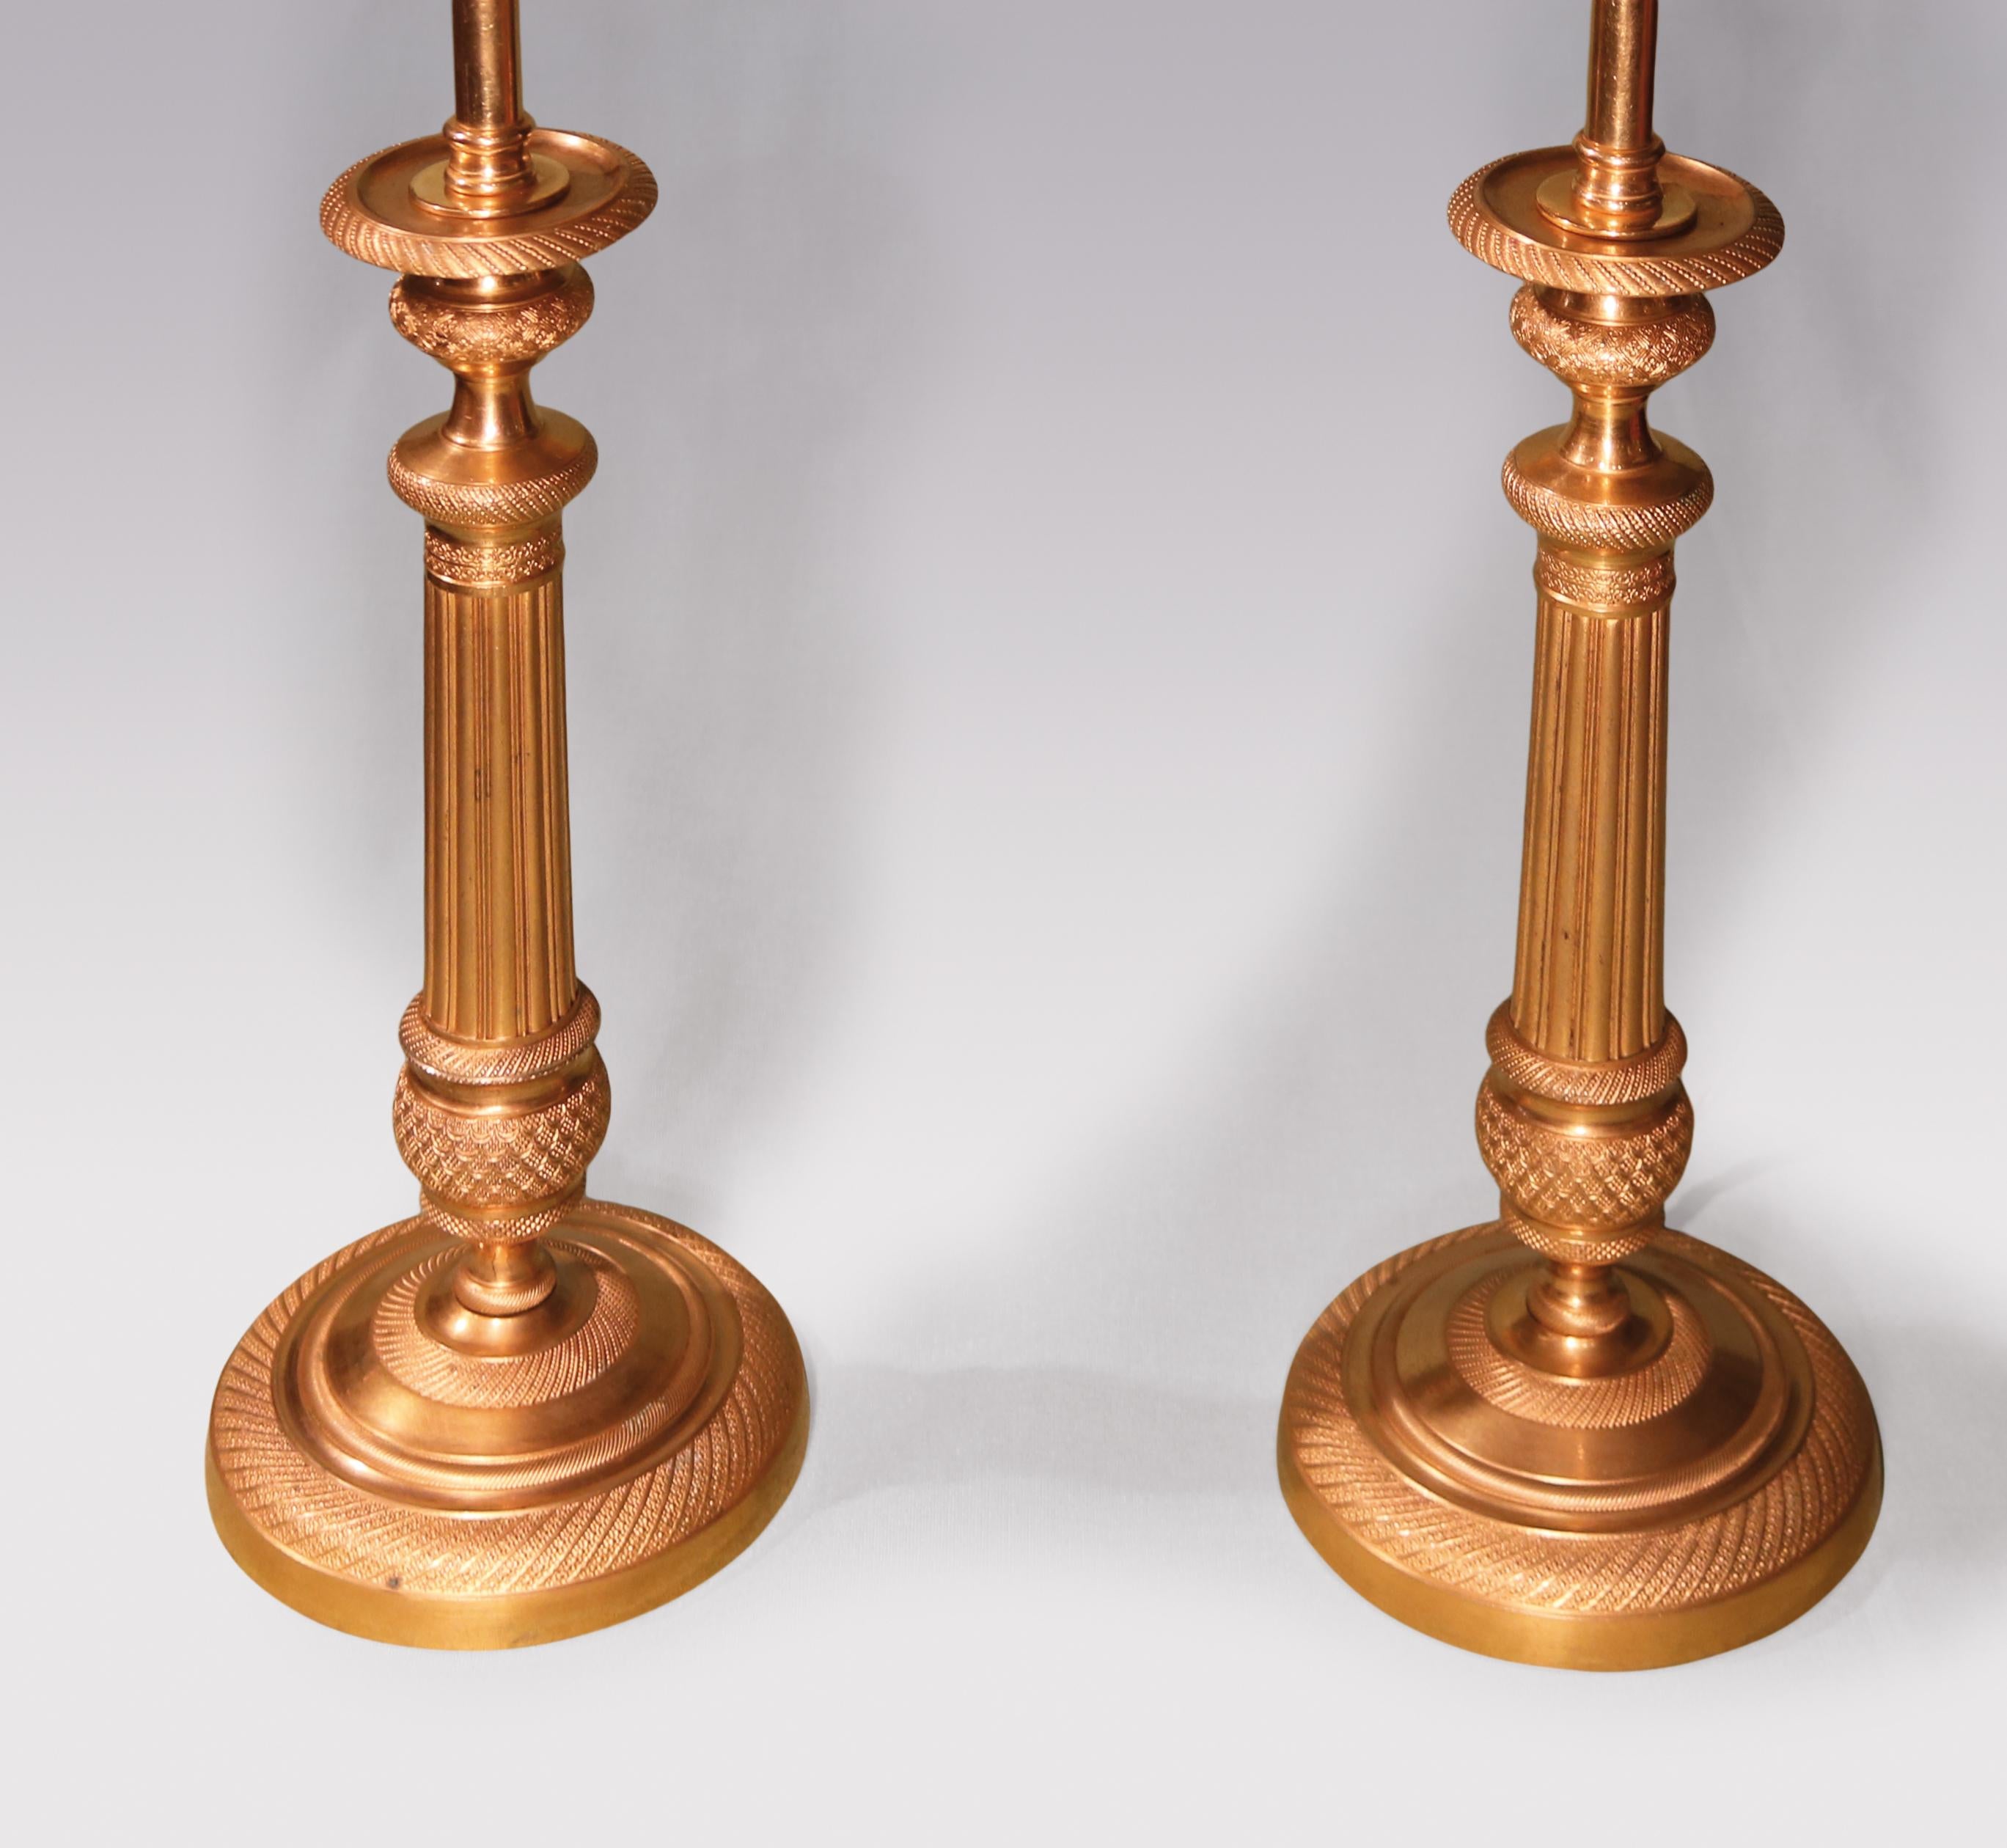 A pair of early 19th century ormolu candlesticks engine-turned throughout having urn shaped nozzles above reeded stems with circular bases. (Now converted to lamps) Height with shades: 20.75'.